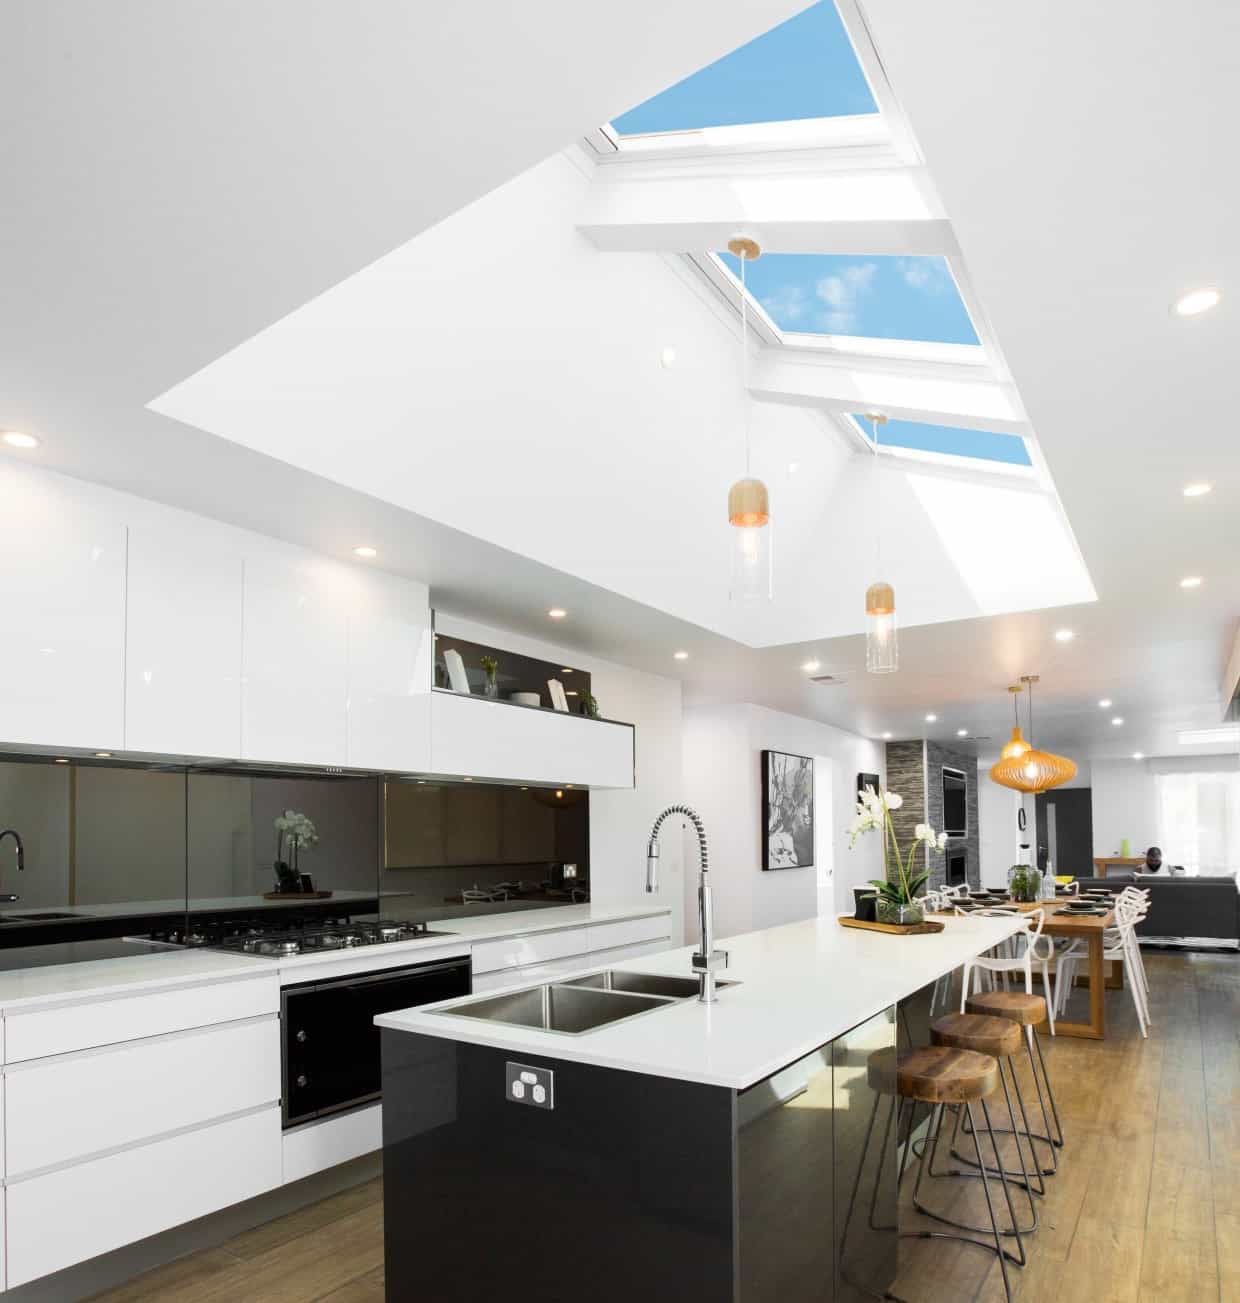 Horizontal Skylights Design For Modern Kitchen (View 24 of 25)